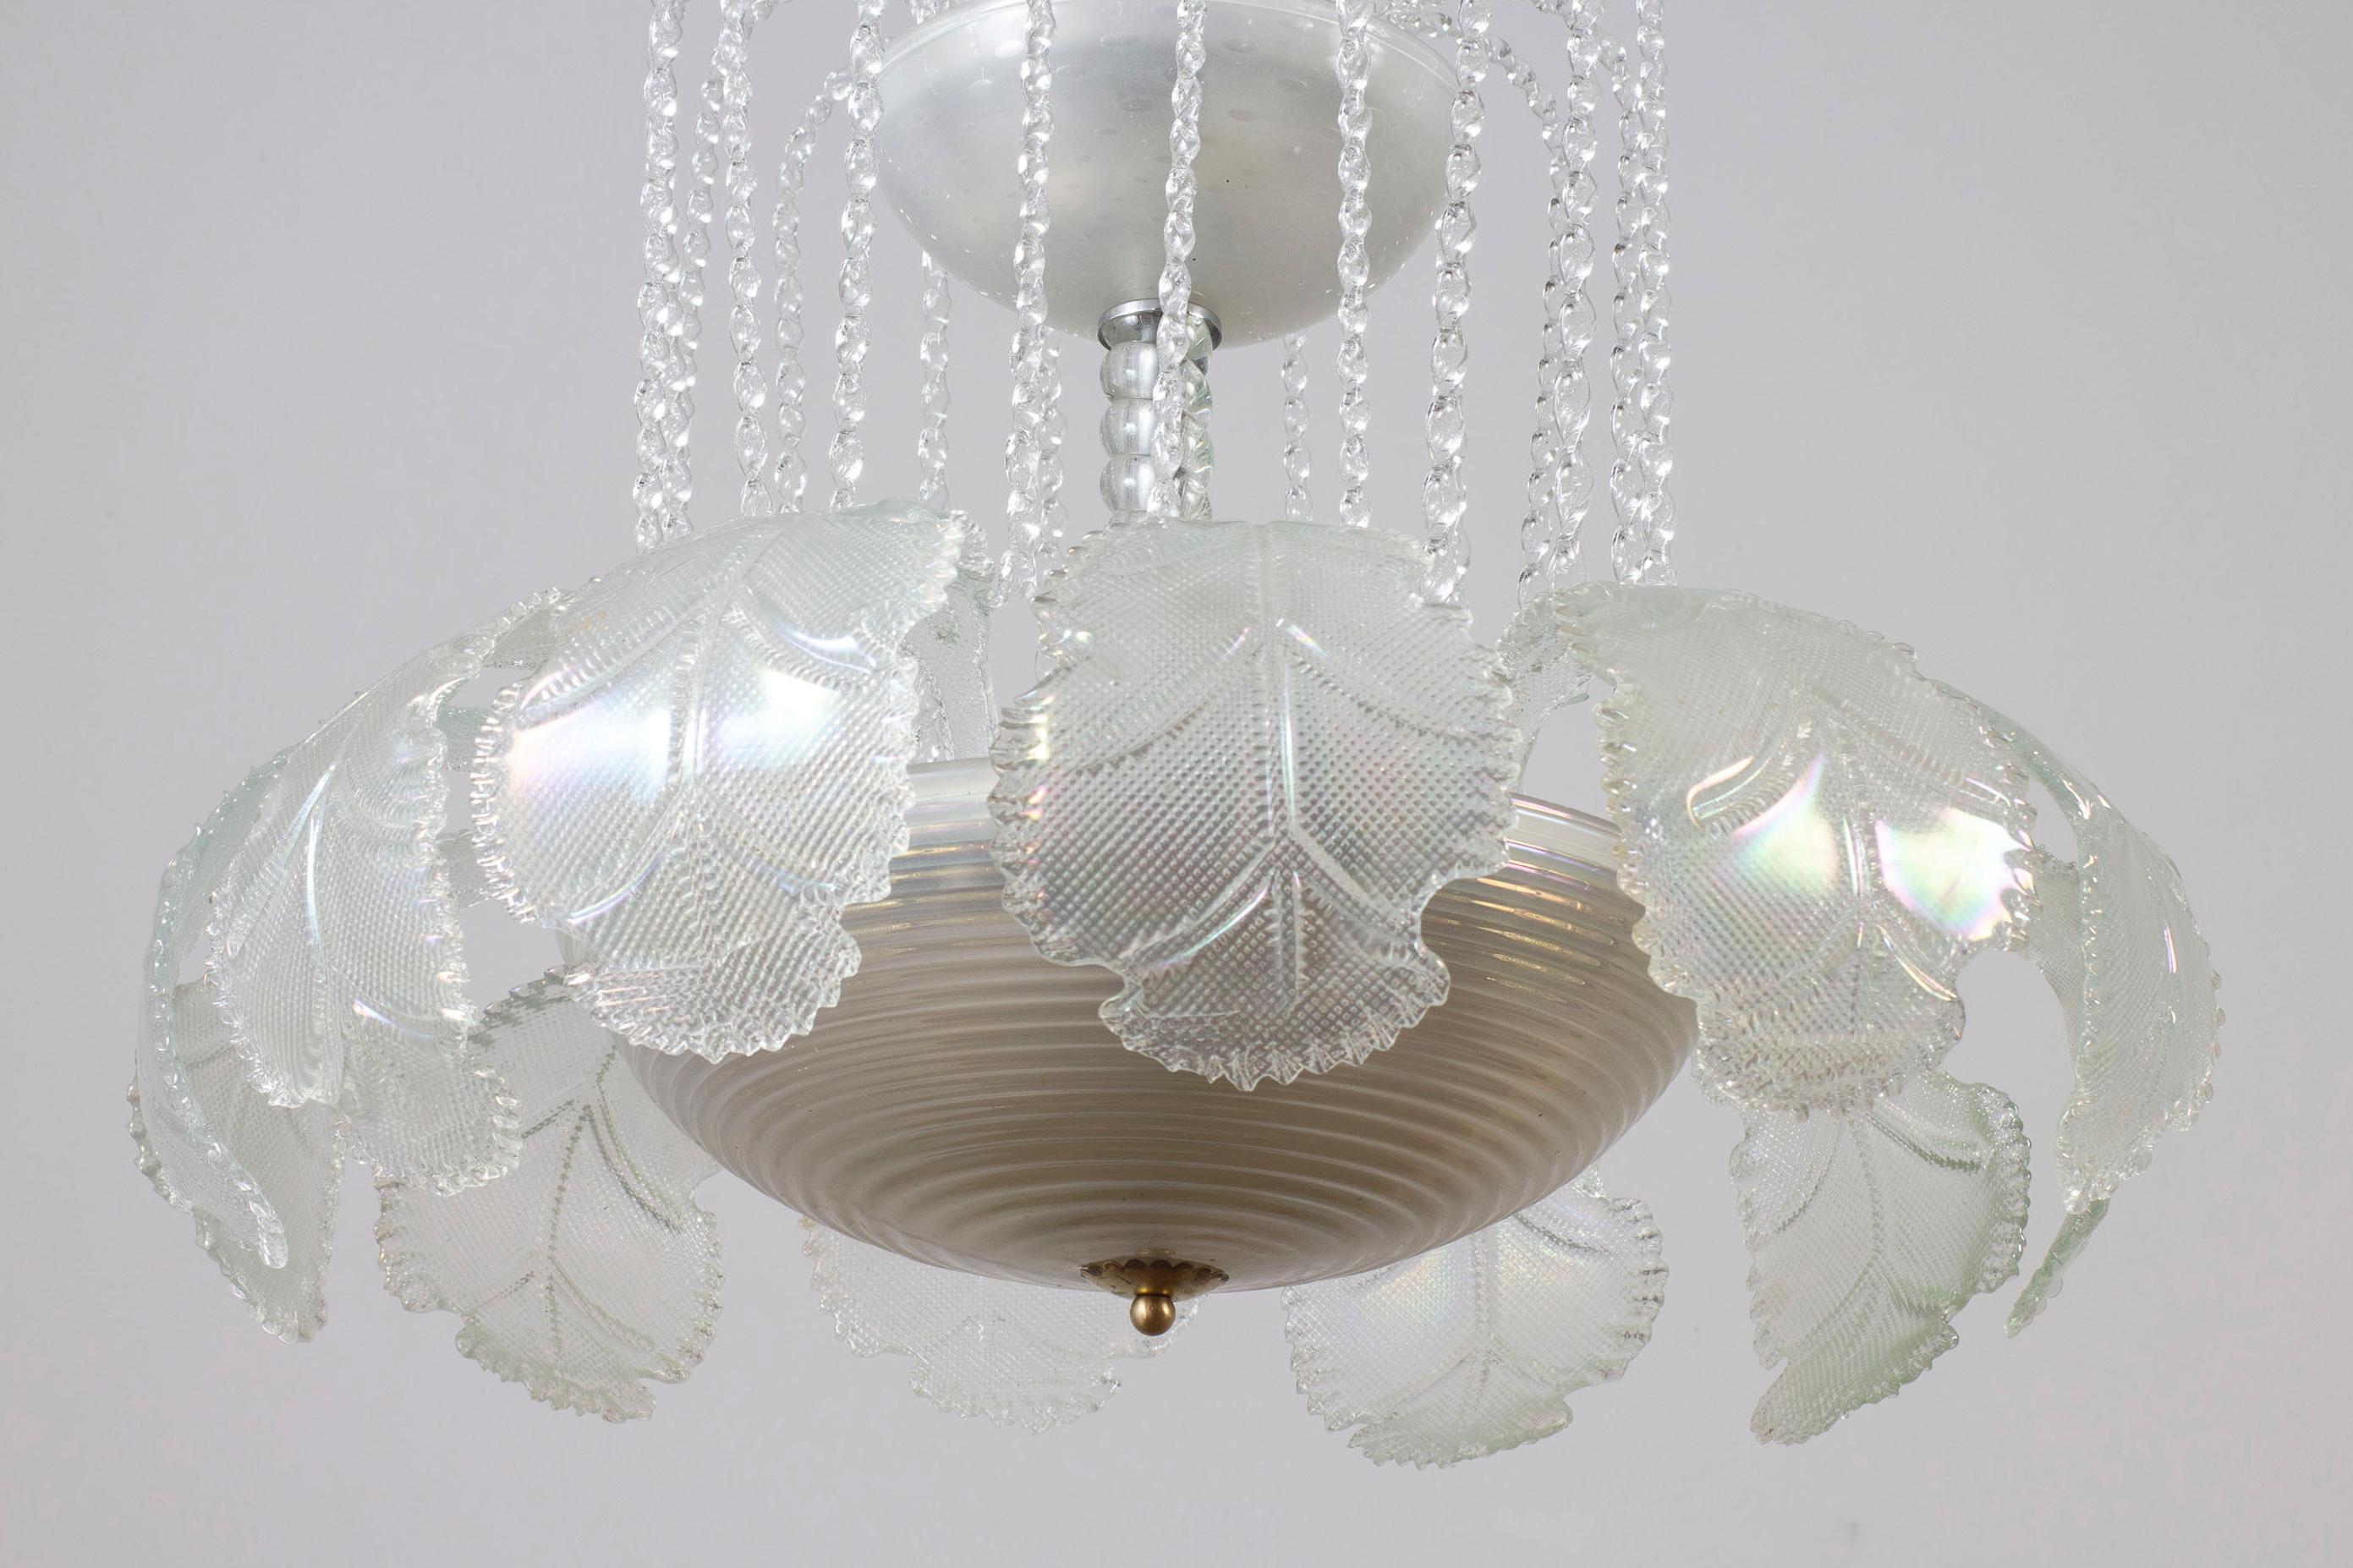 Italian Superb Art Deco Ninfea Murano Glass Chandelier by Barovier Italy, 1940 For Sale